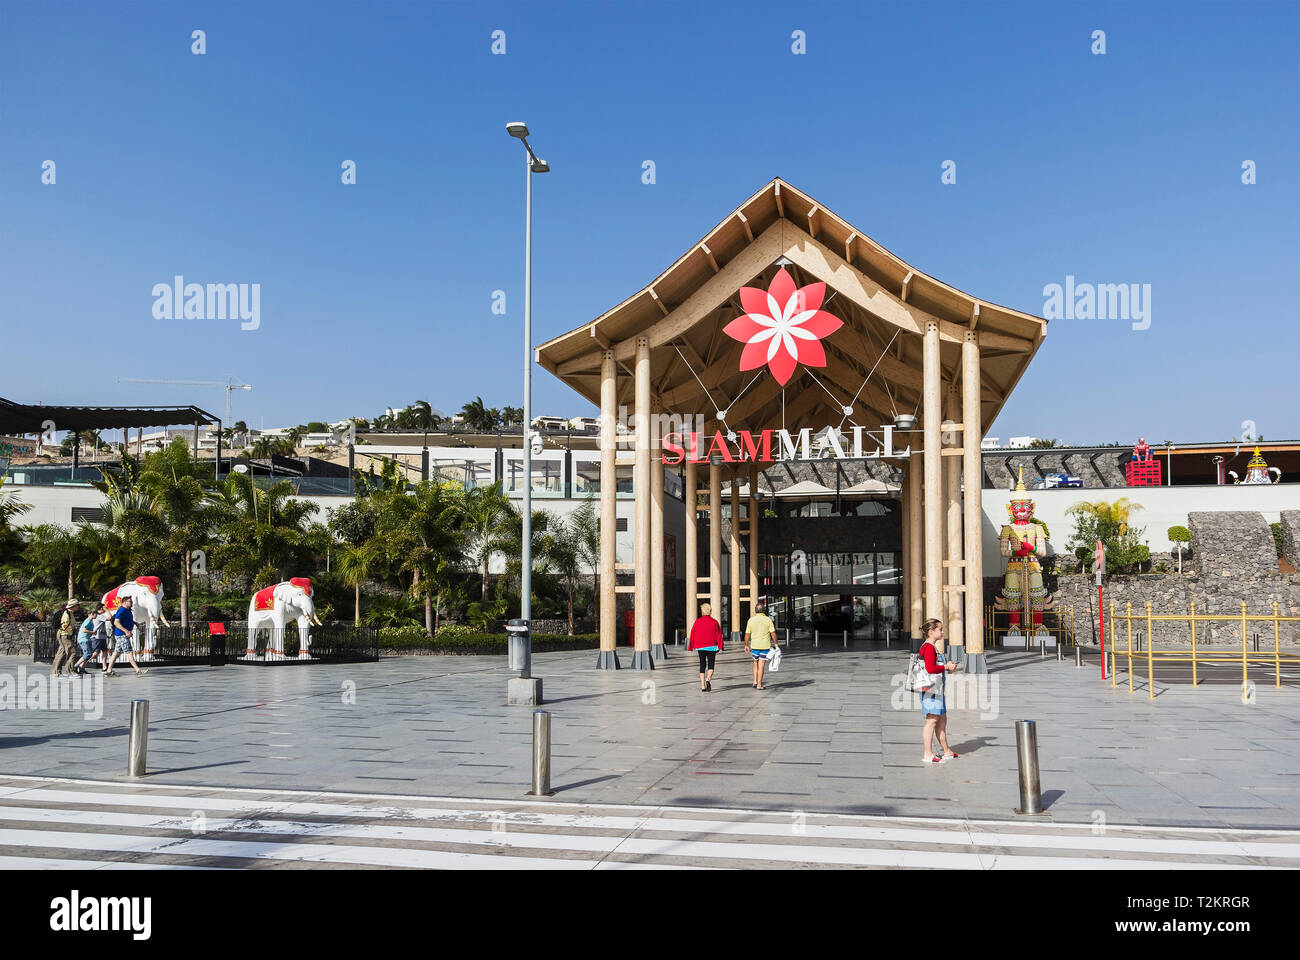 Shoppping Mall High Resolution Stock Photography and Images - Alamy